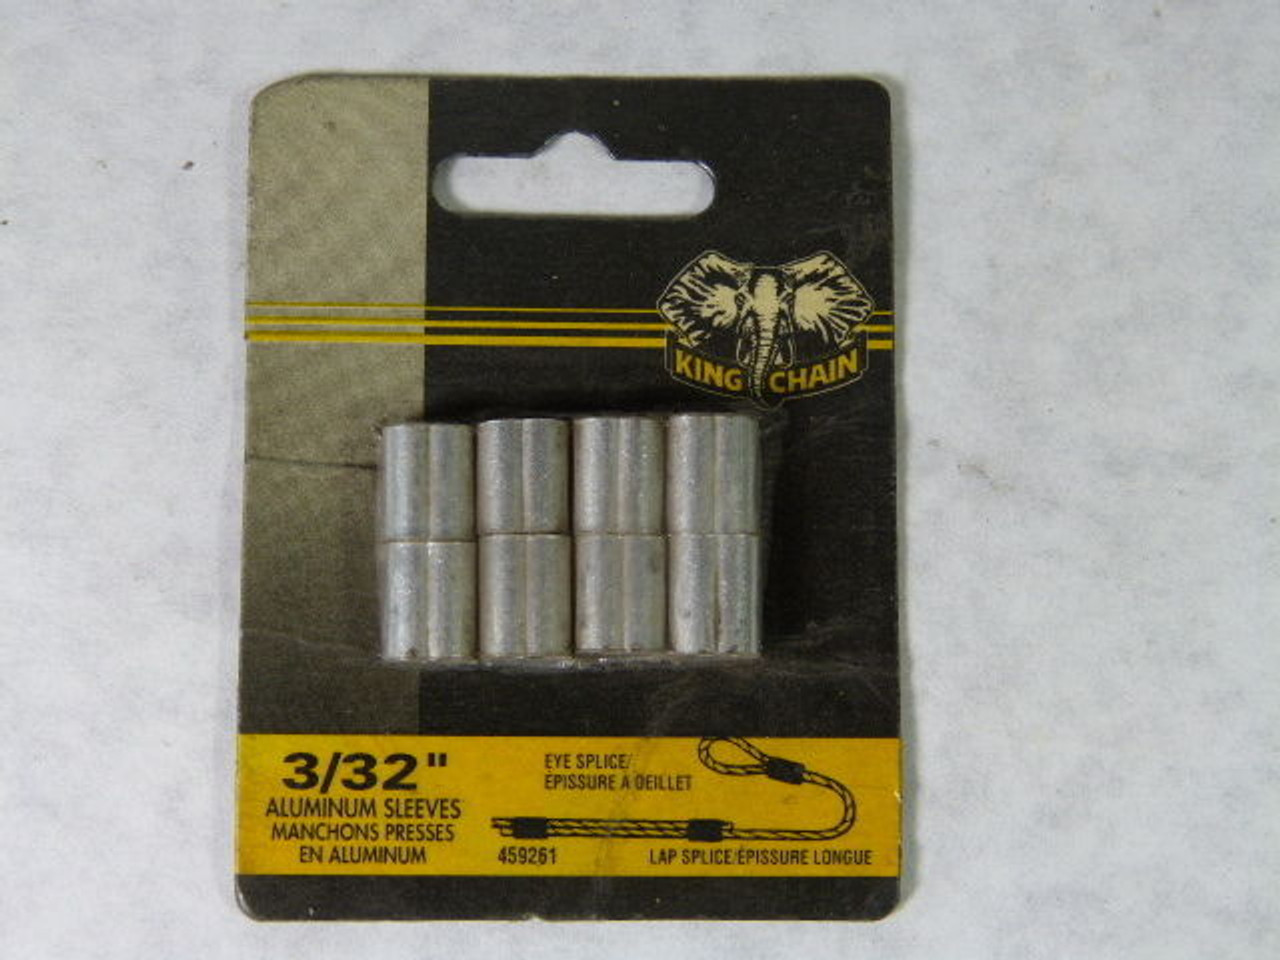 King Chain 459261 Aluminum Sleeve 3/32" Pack of 8 ! NEW !